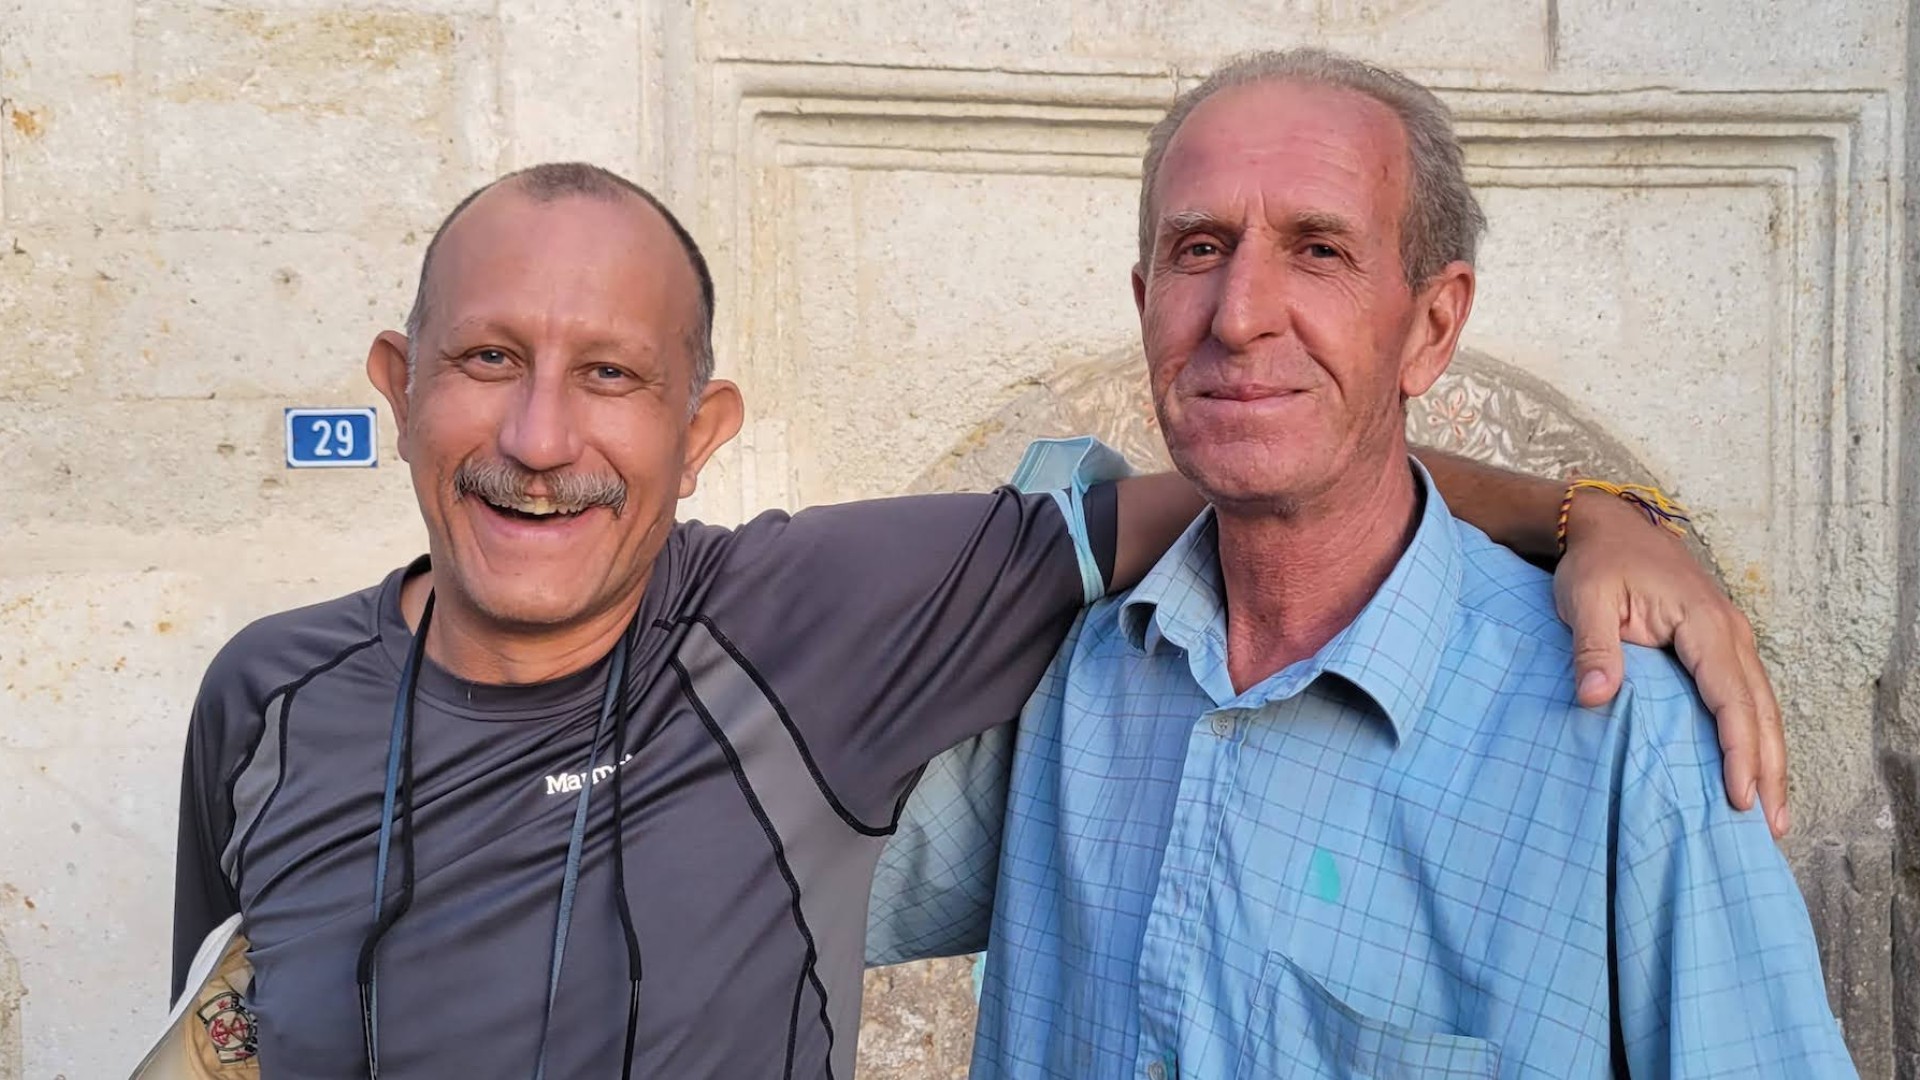 Tour guide and guests smiling while visiting Turkey